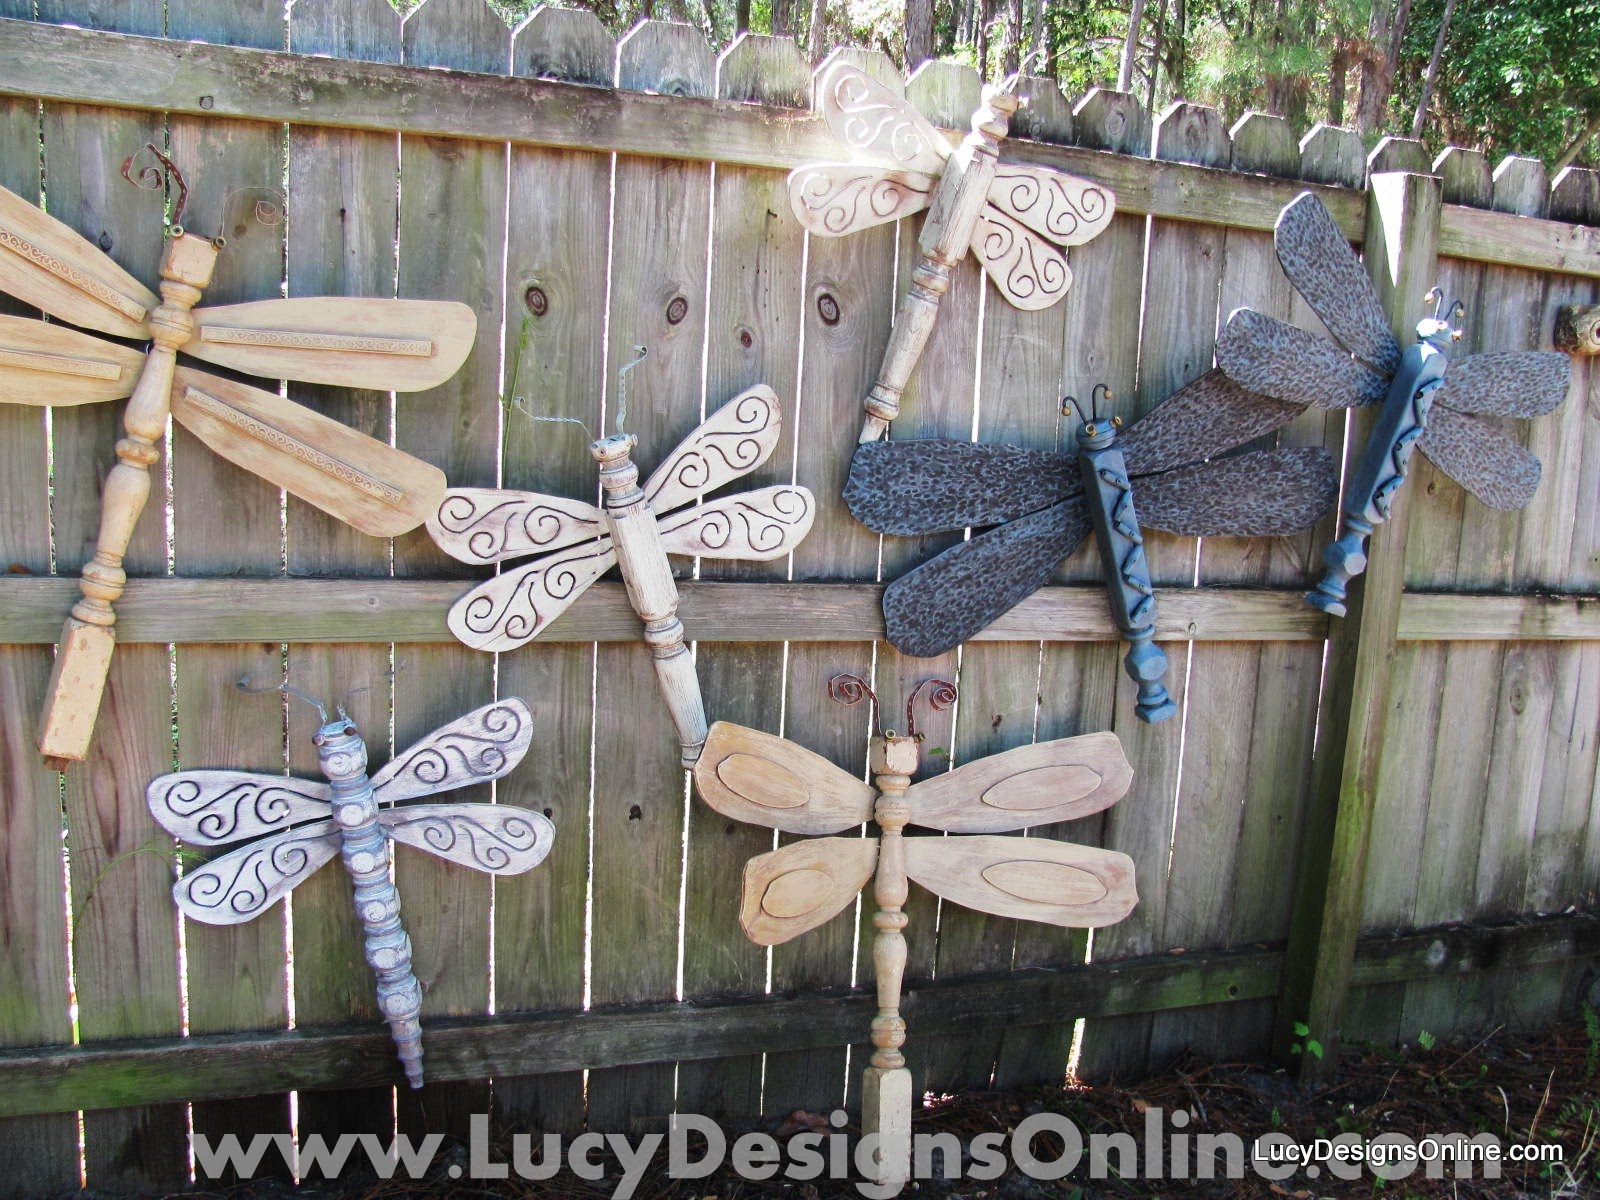 Lucy Designs The Original Table Leg Dragonflies With